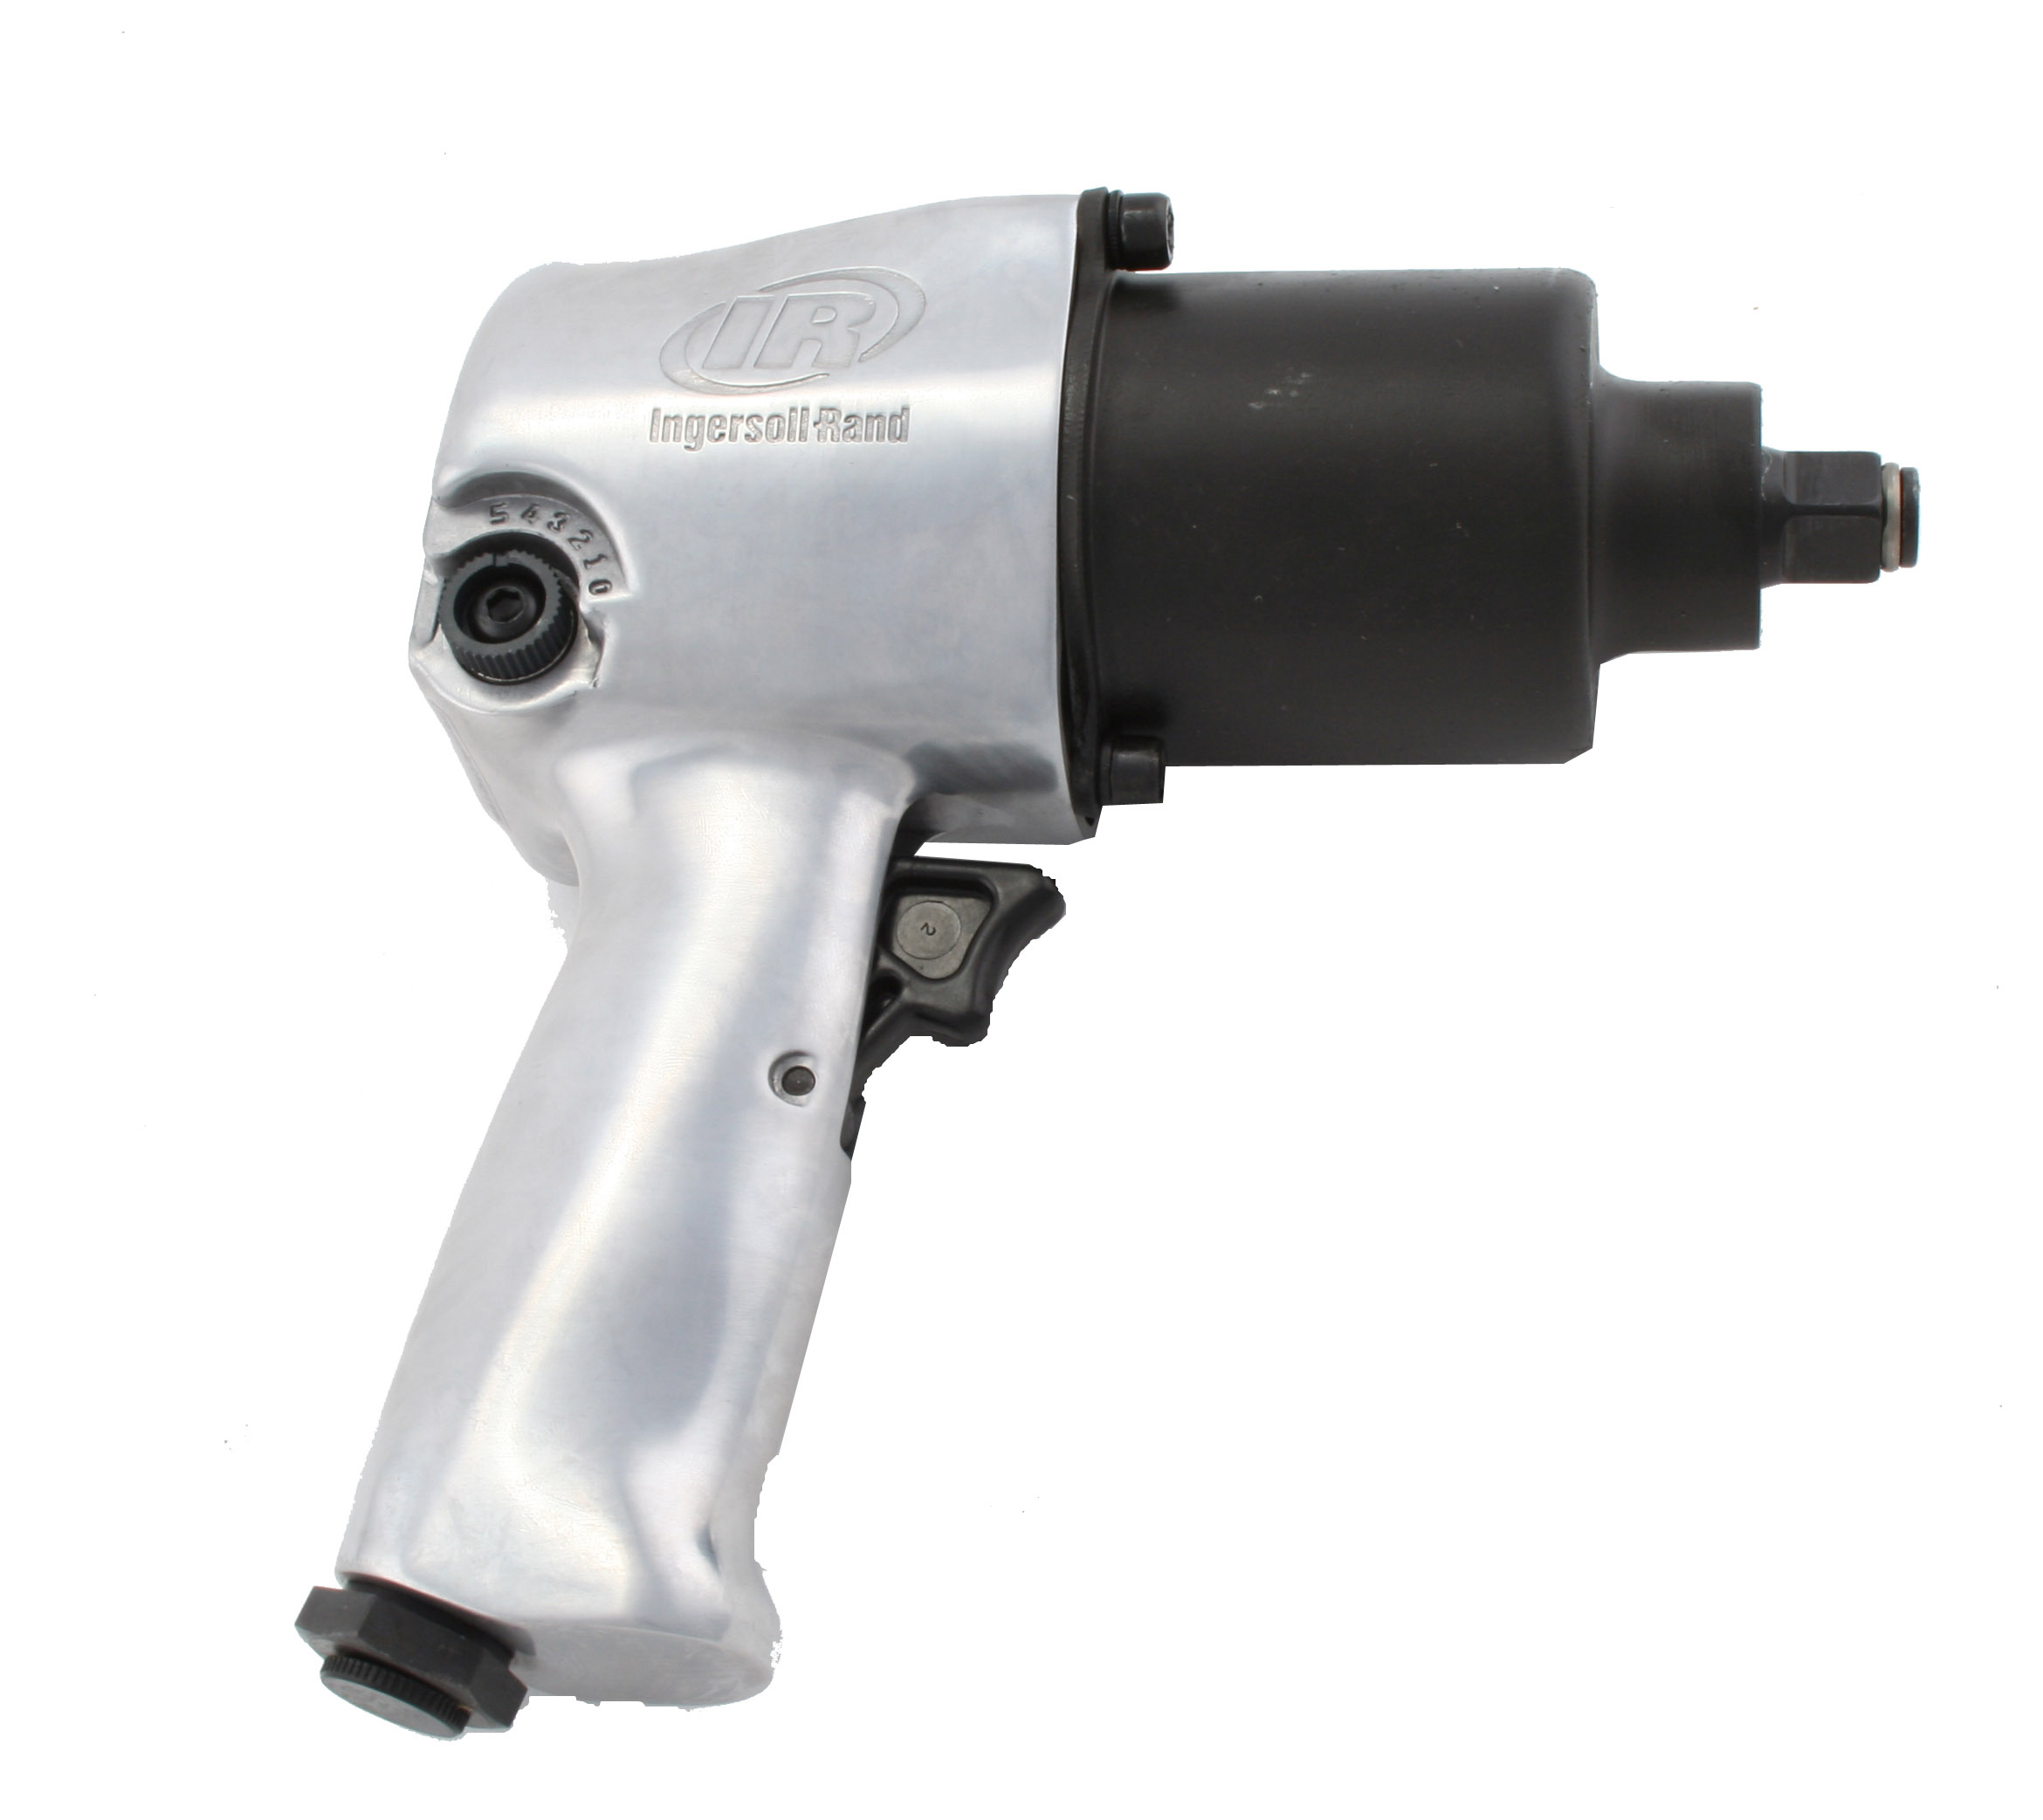 Ir231h Ingersoll Rand 1/2" Drive Air Impact Wrench IR 231h for sale online 